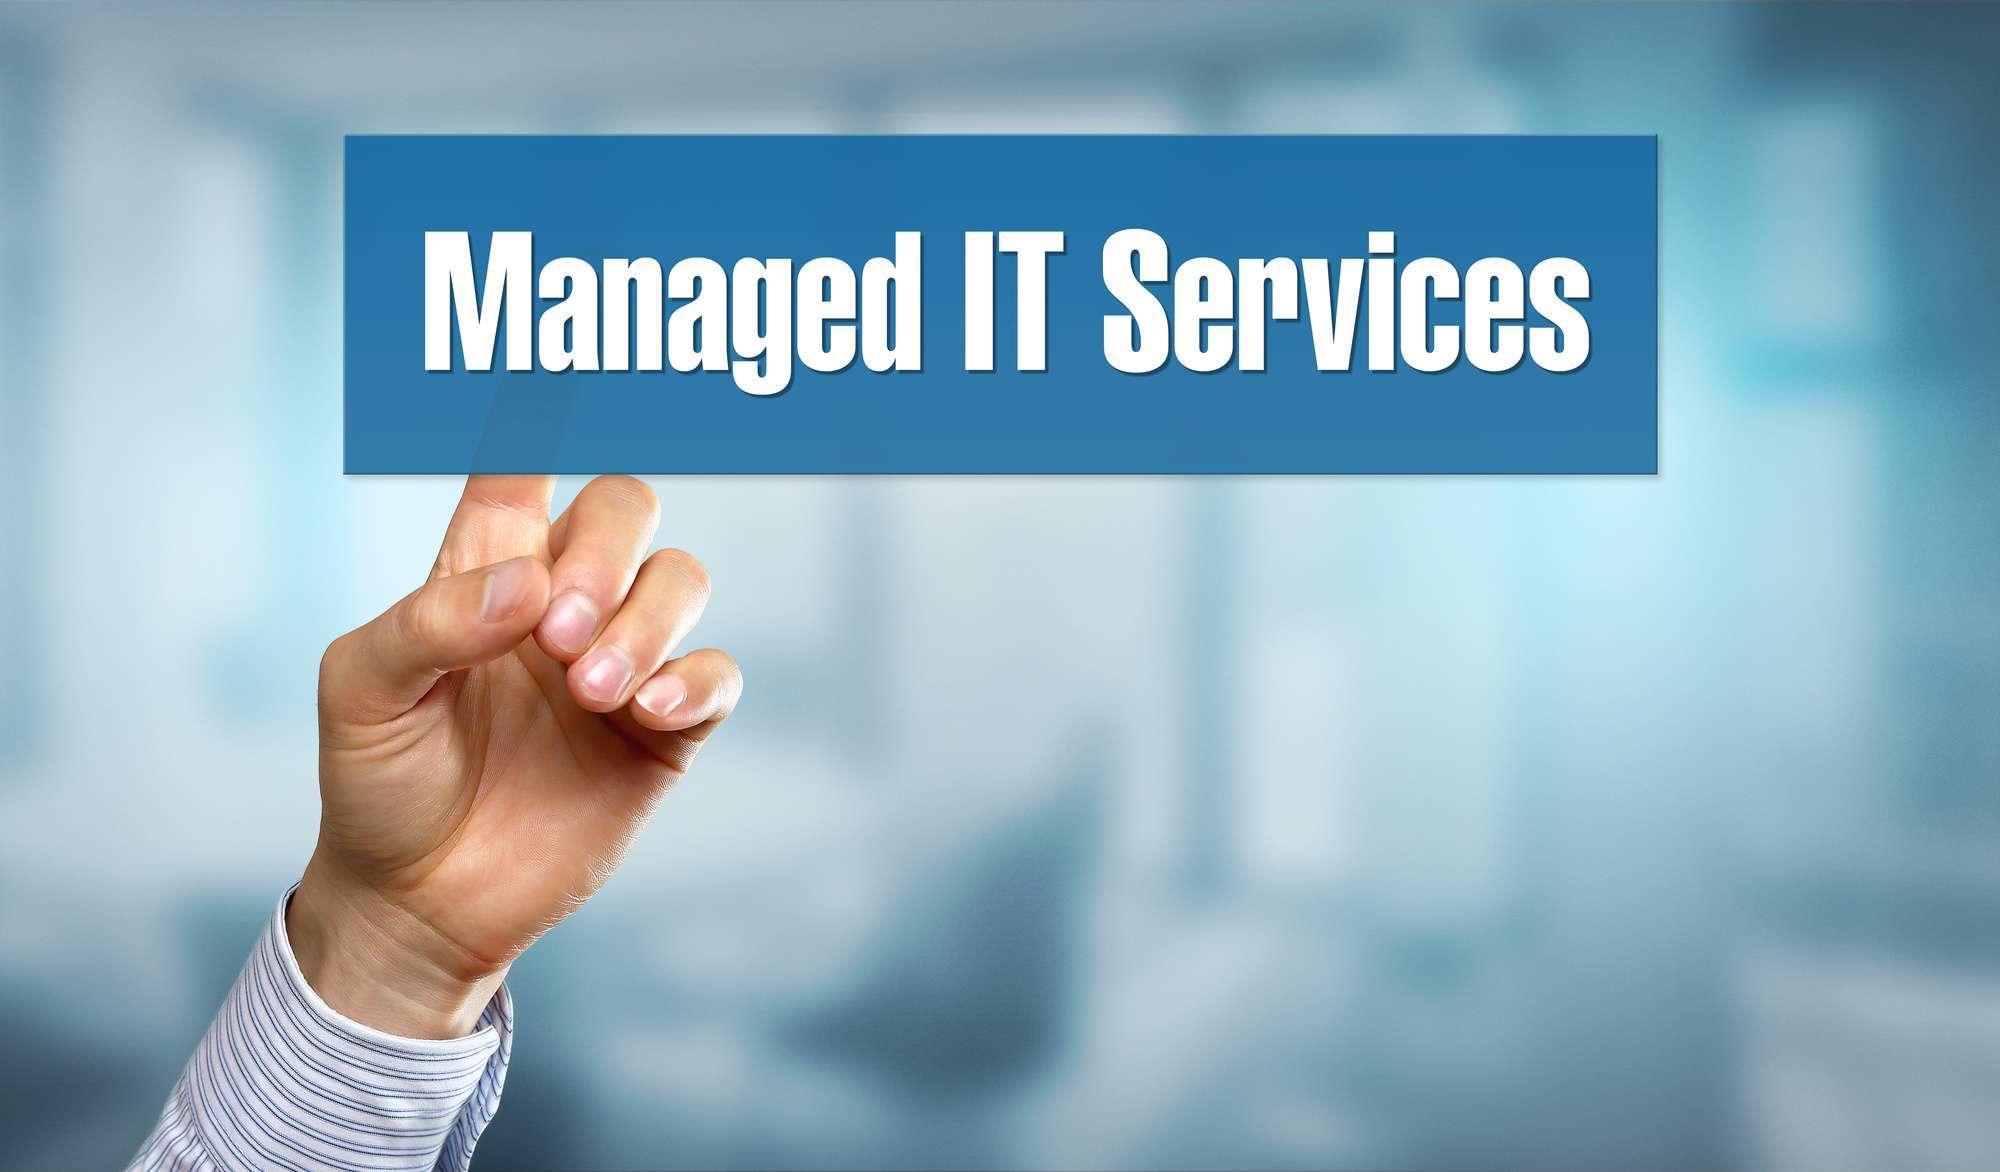 Transform your Business with Managed IT Services